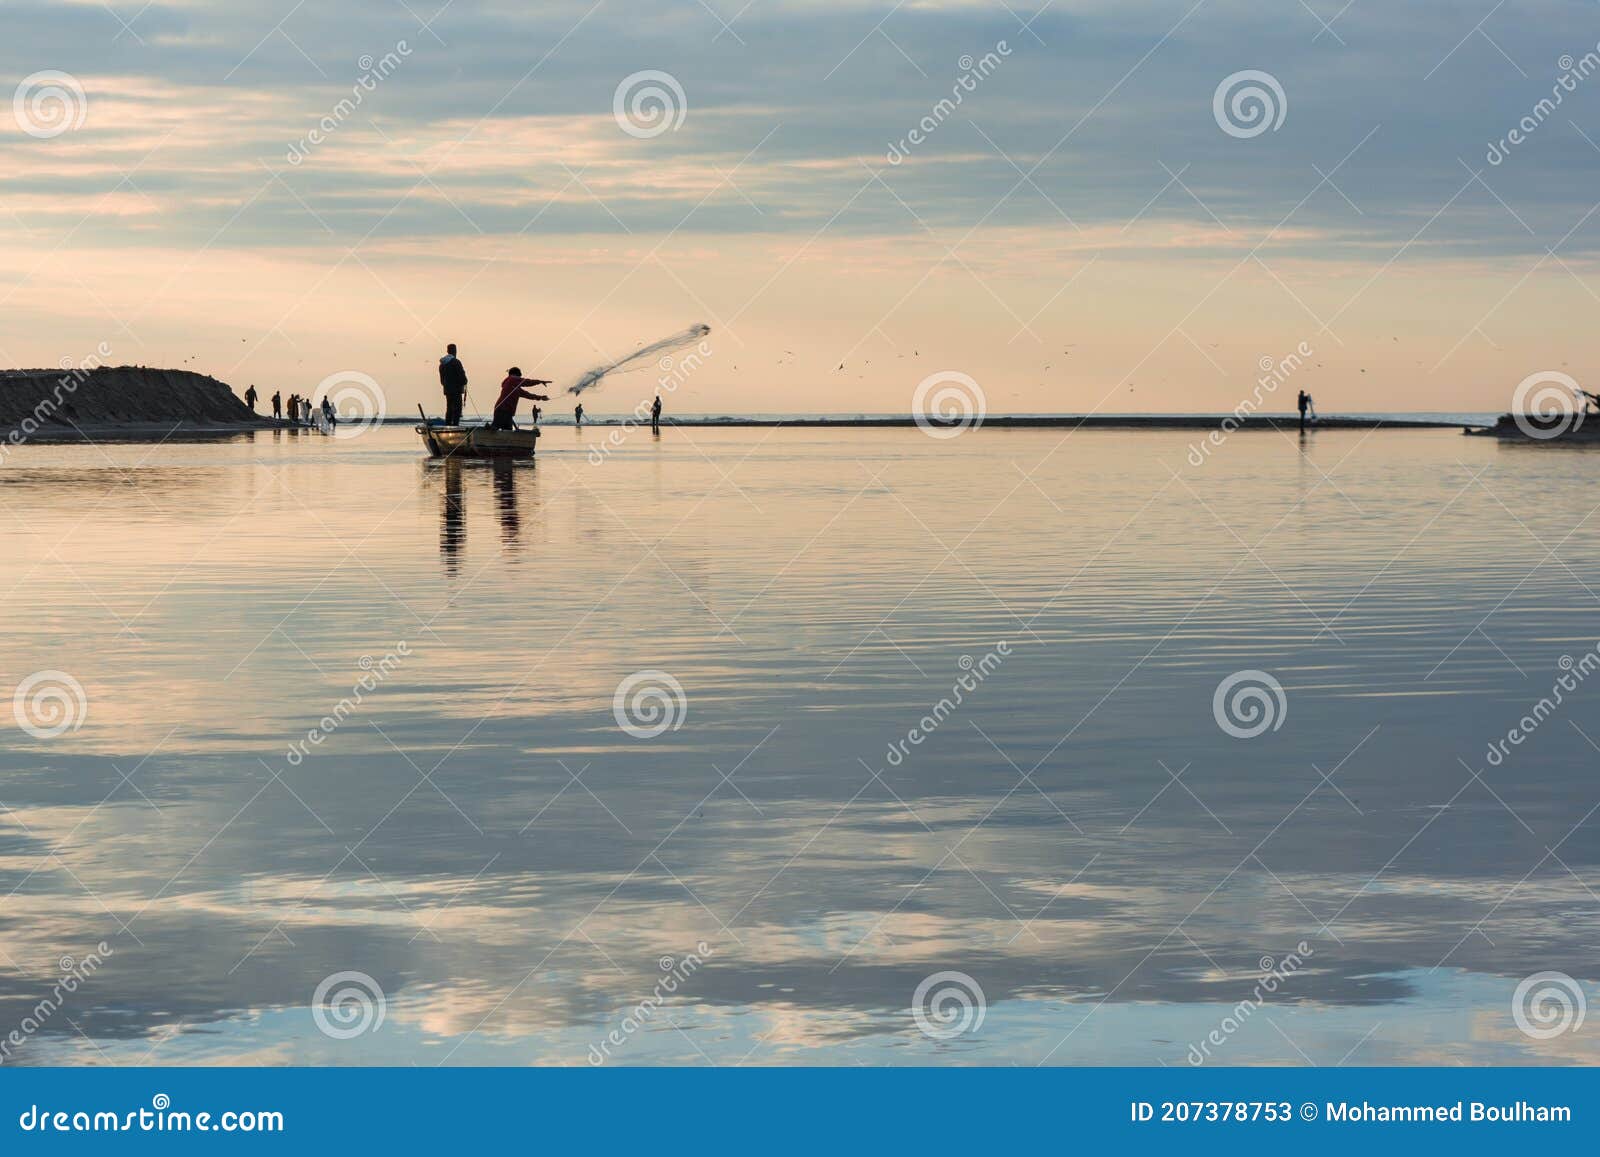 Fisherman in Boat Get Fishing Nets from River, Silhouette of